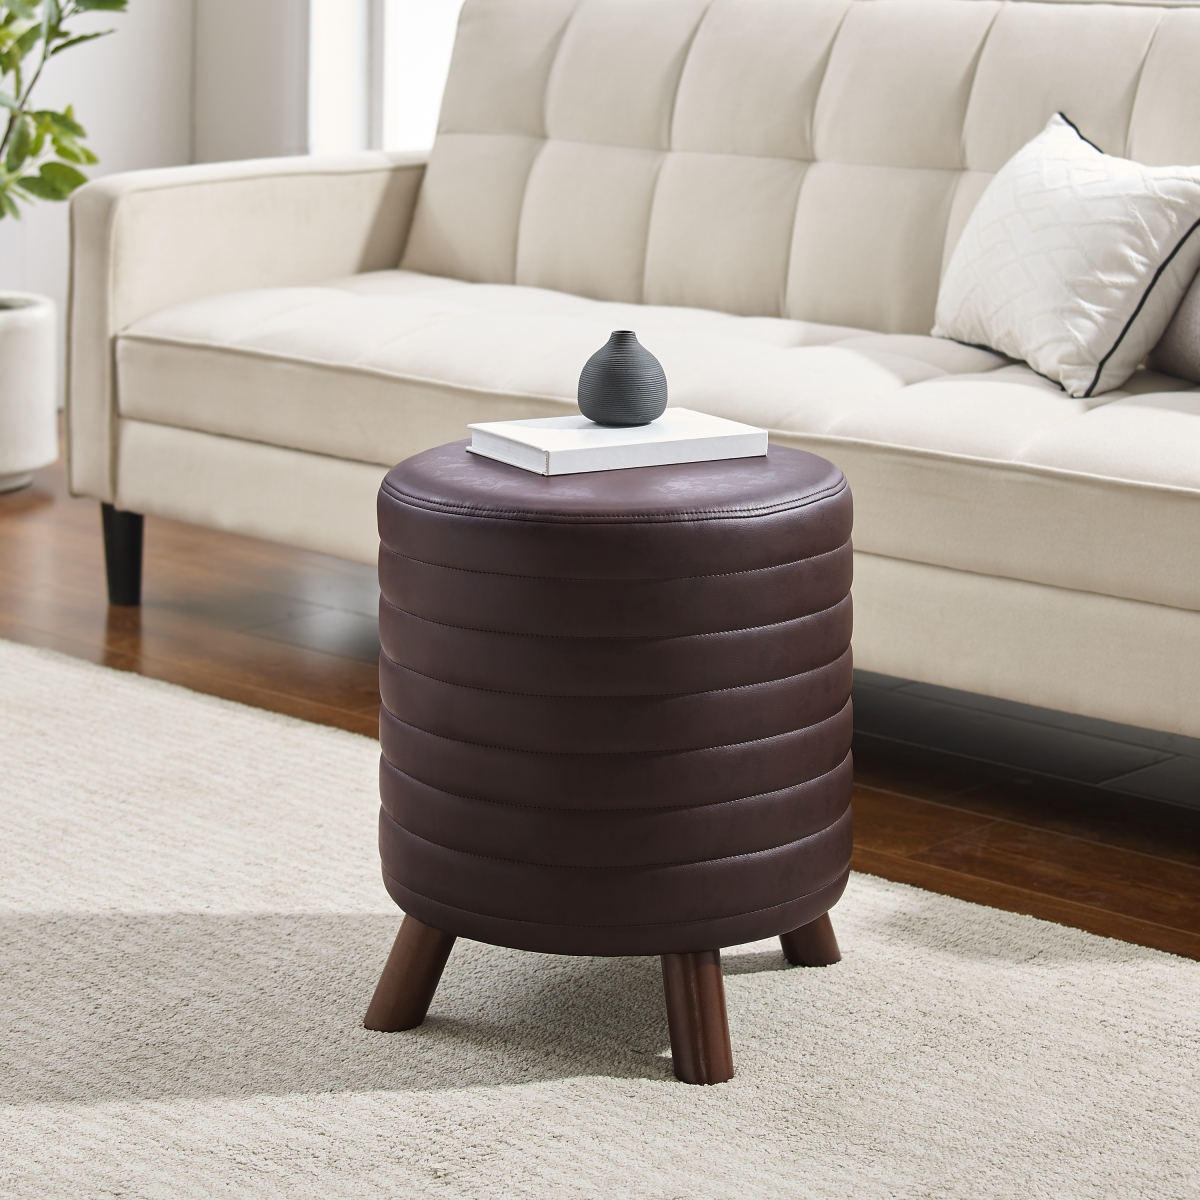 Picture of Linon Home Decor ST009BRP01U 18.12 x 17.75 x 17.75 in. Rivard Round Faux Leather Stool, Brown